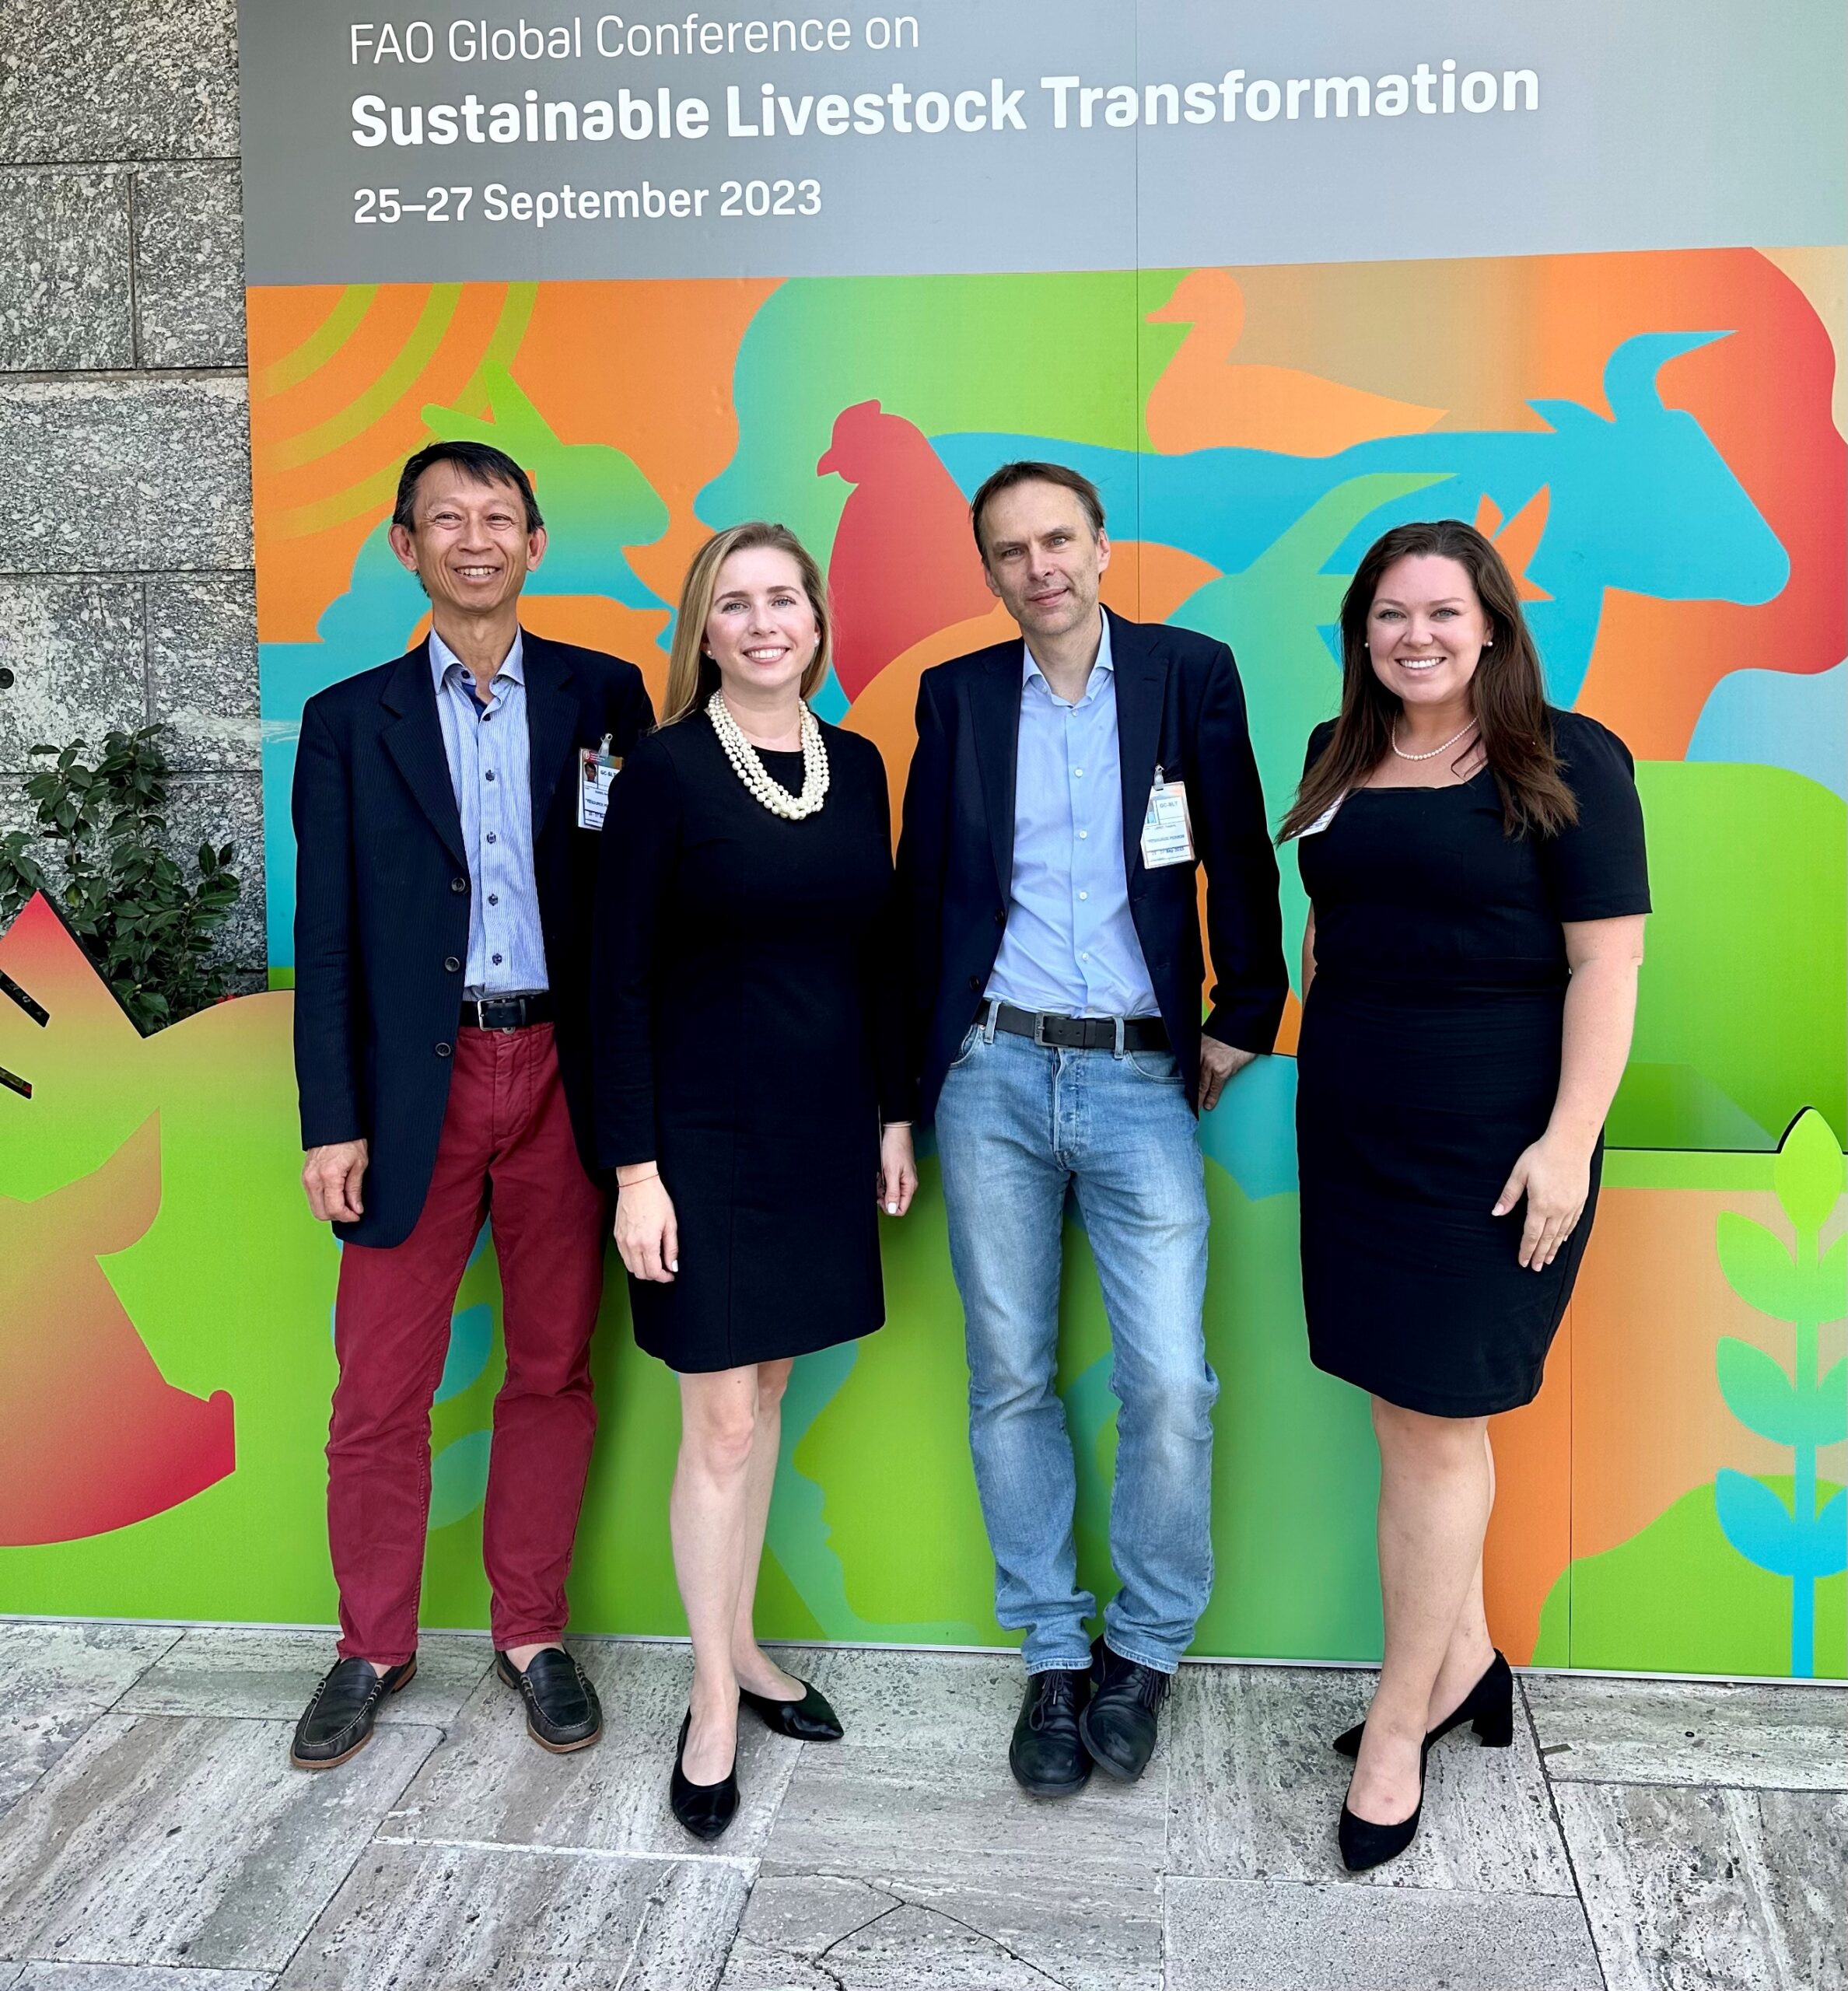 Maria C. Zieba poses with International Meat Secretariat, Vrije University Brussels Professor and NCBA Government Affairs Chief Counsel